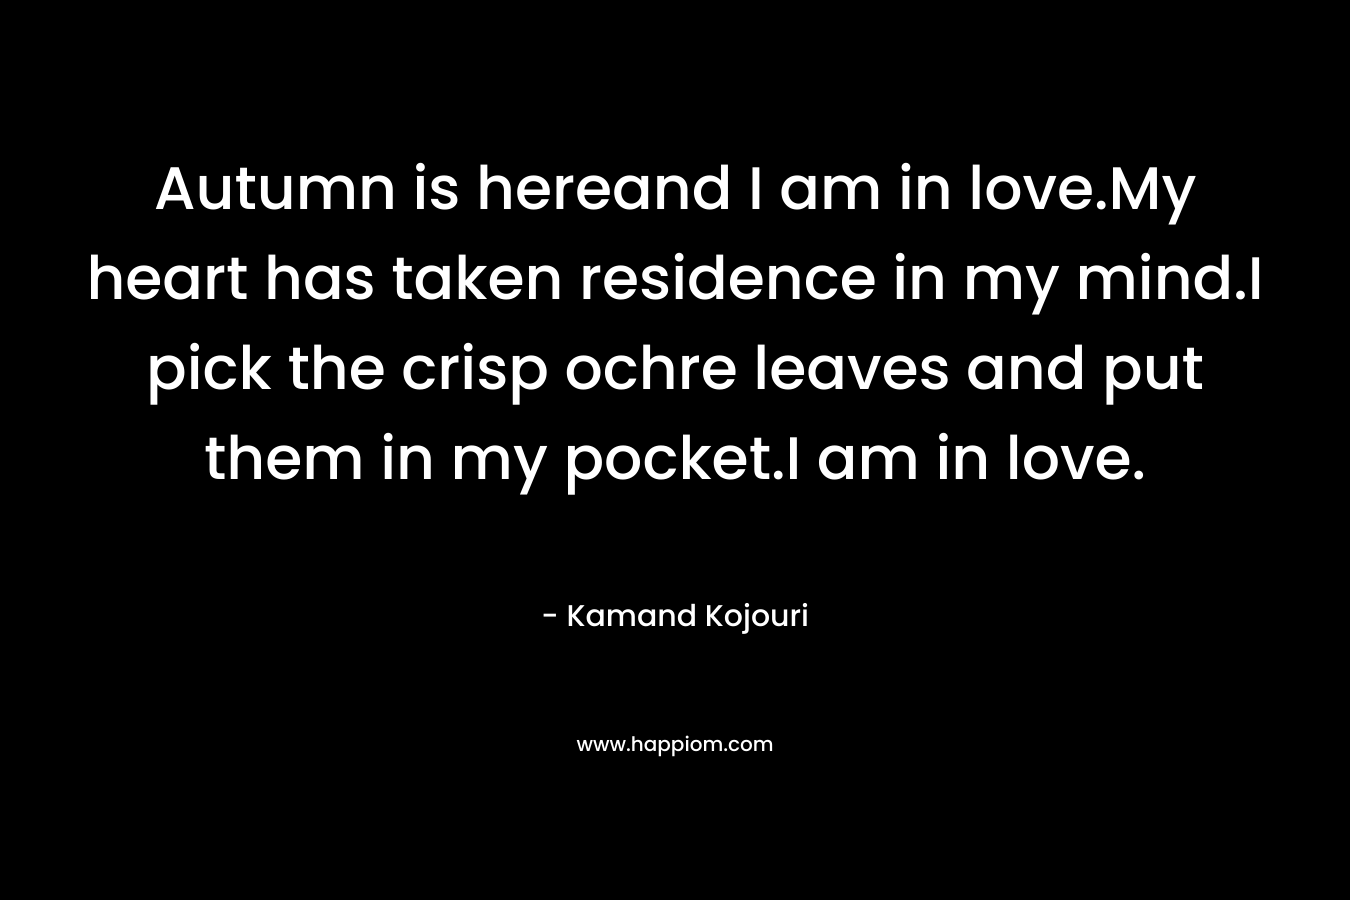 Autumn is hereand I am in love.My heart has taken residence in my mind.I pick the crisp ochre leaves and put them in my pocket.I am in love. – Kamand Kojouri